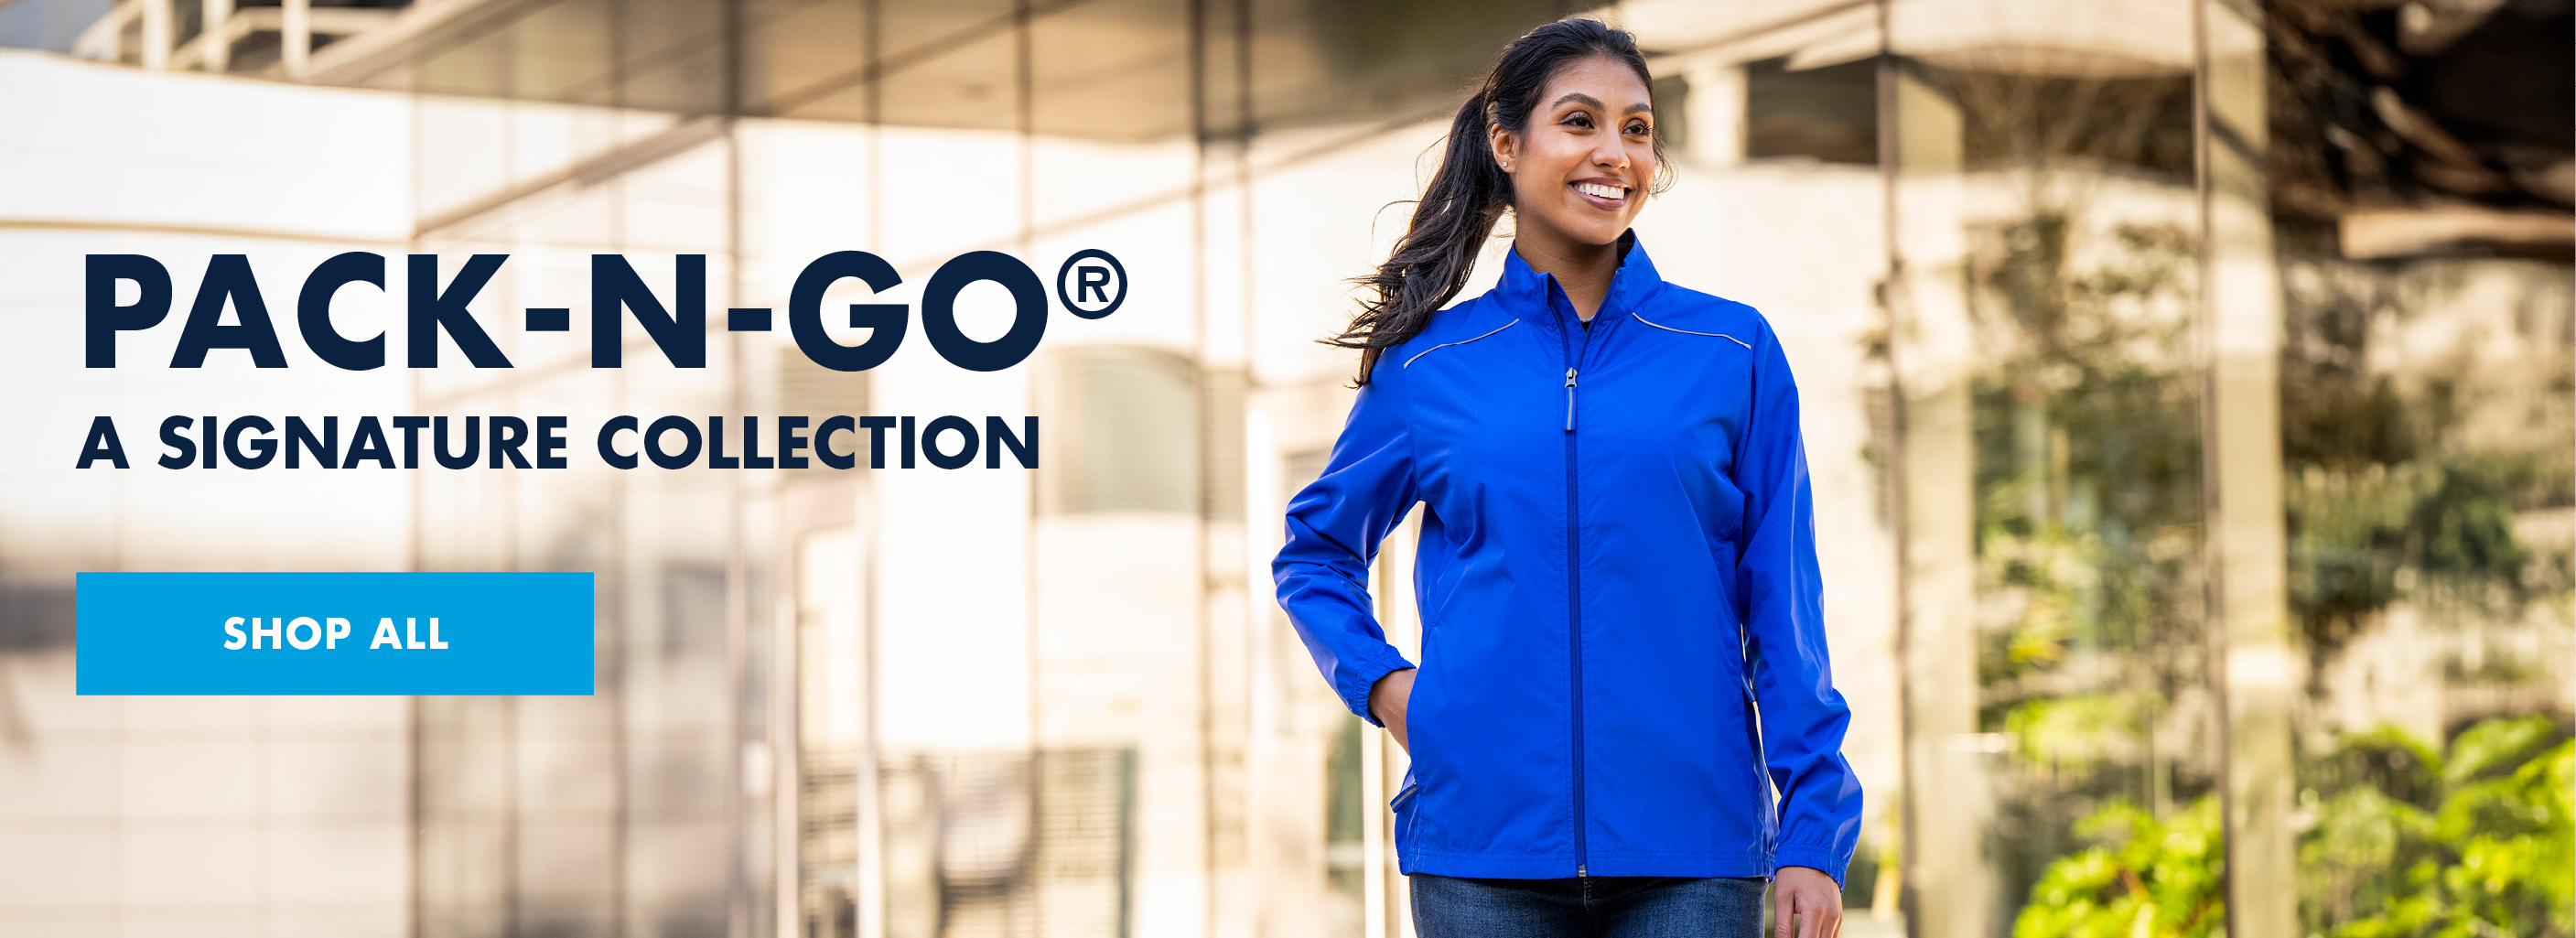 Pack-N-Go - A Signature Collection - Shop All